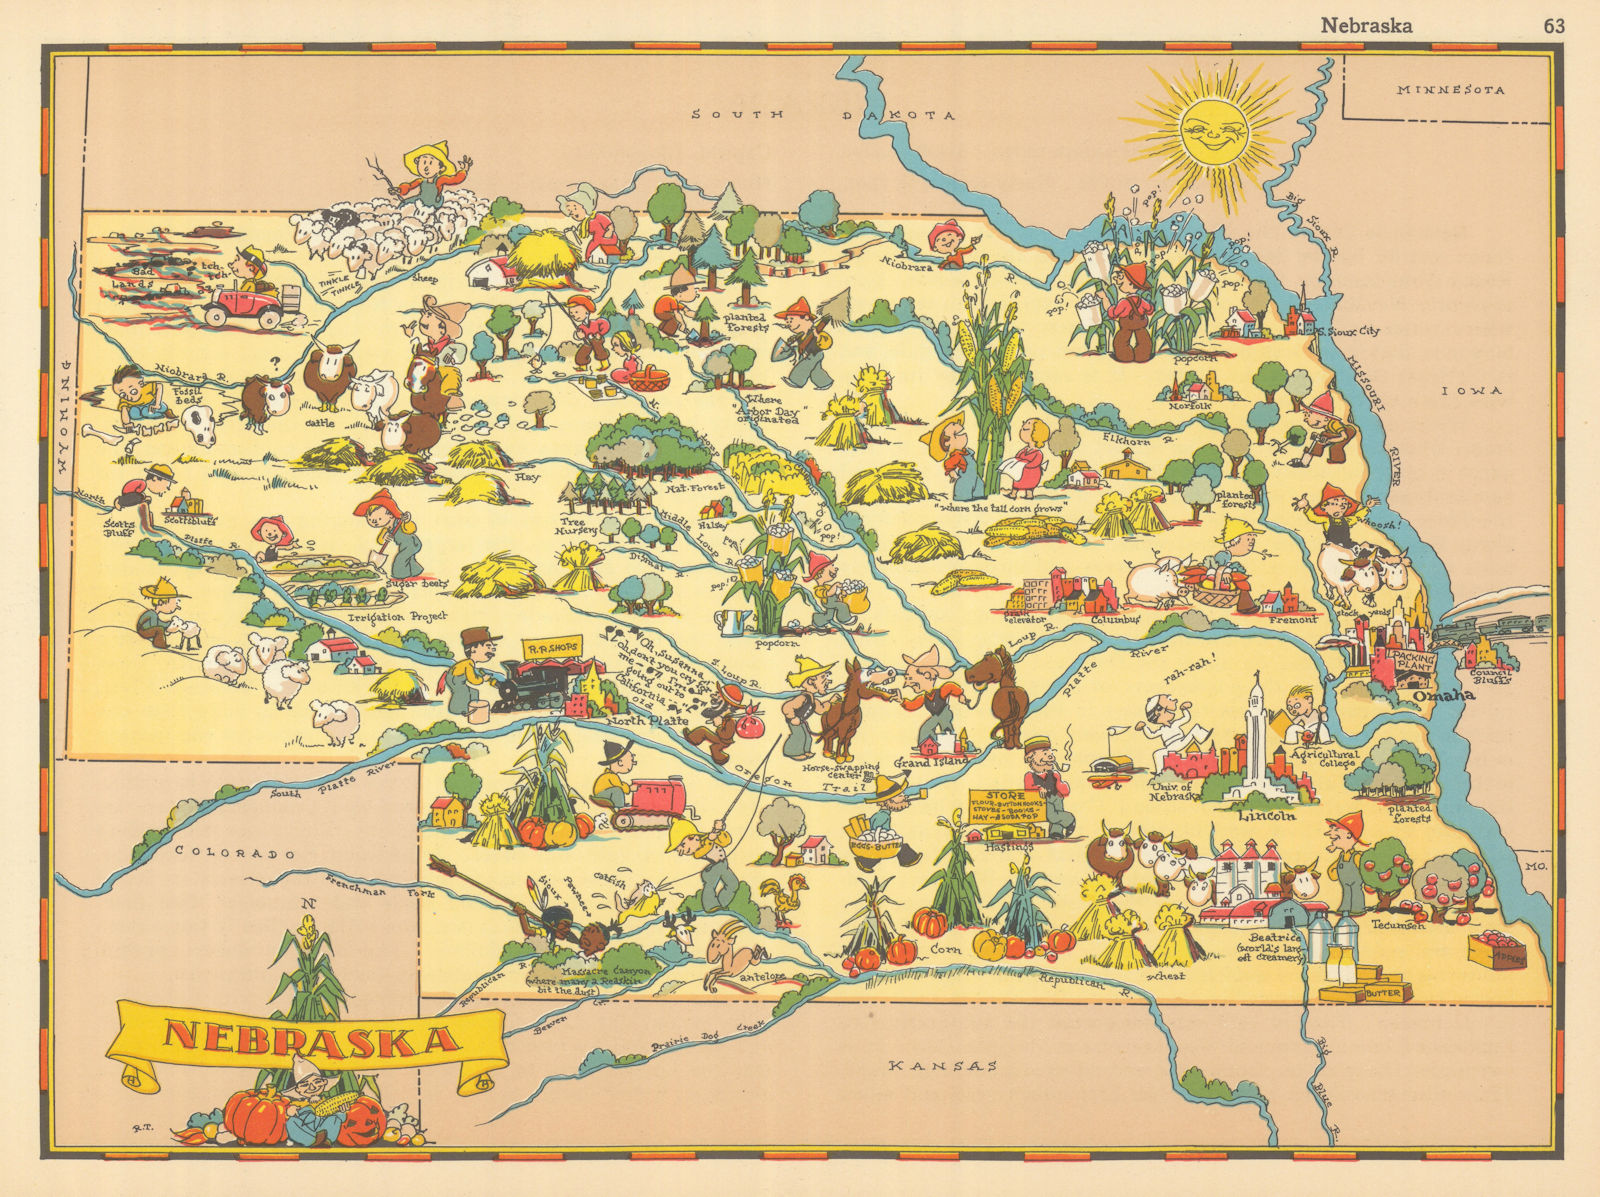 Associate Product Nebraska. Pictorial state map by Ruth Taylor White 1935 old vintage chart